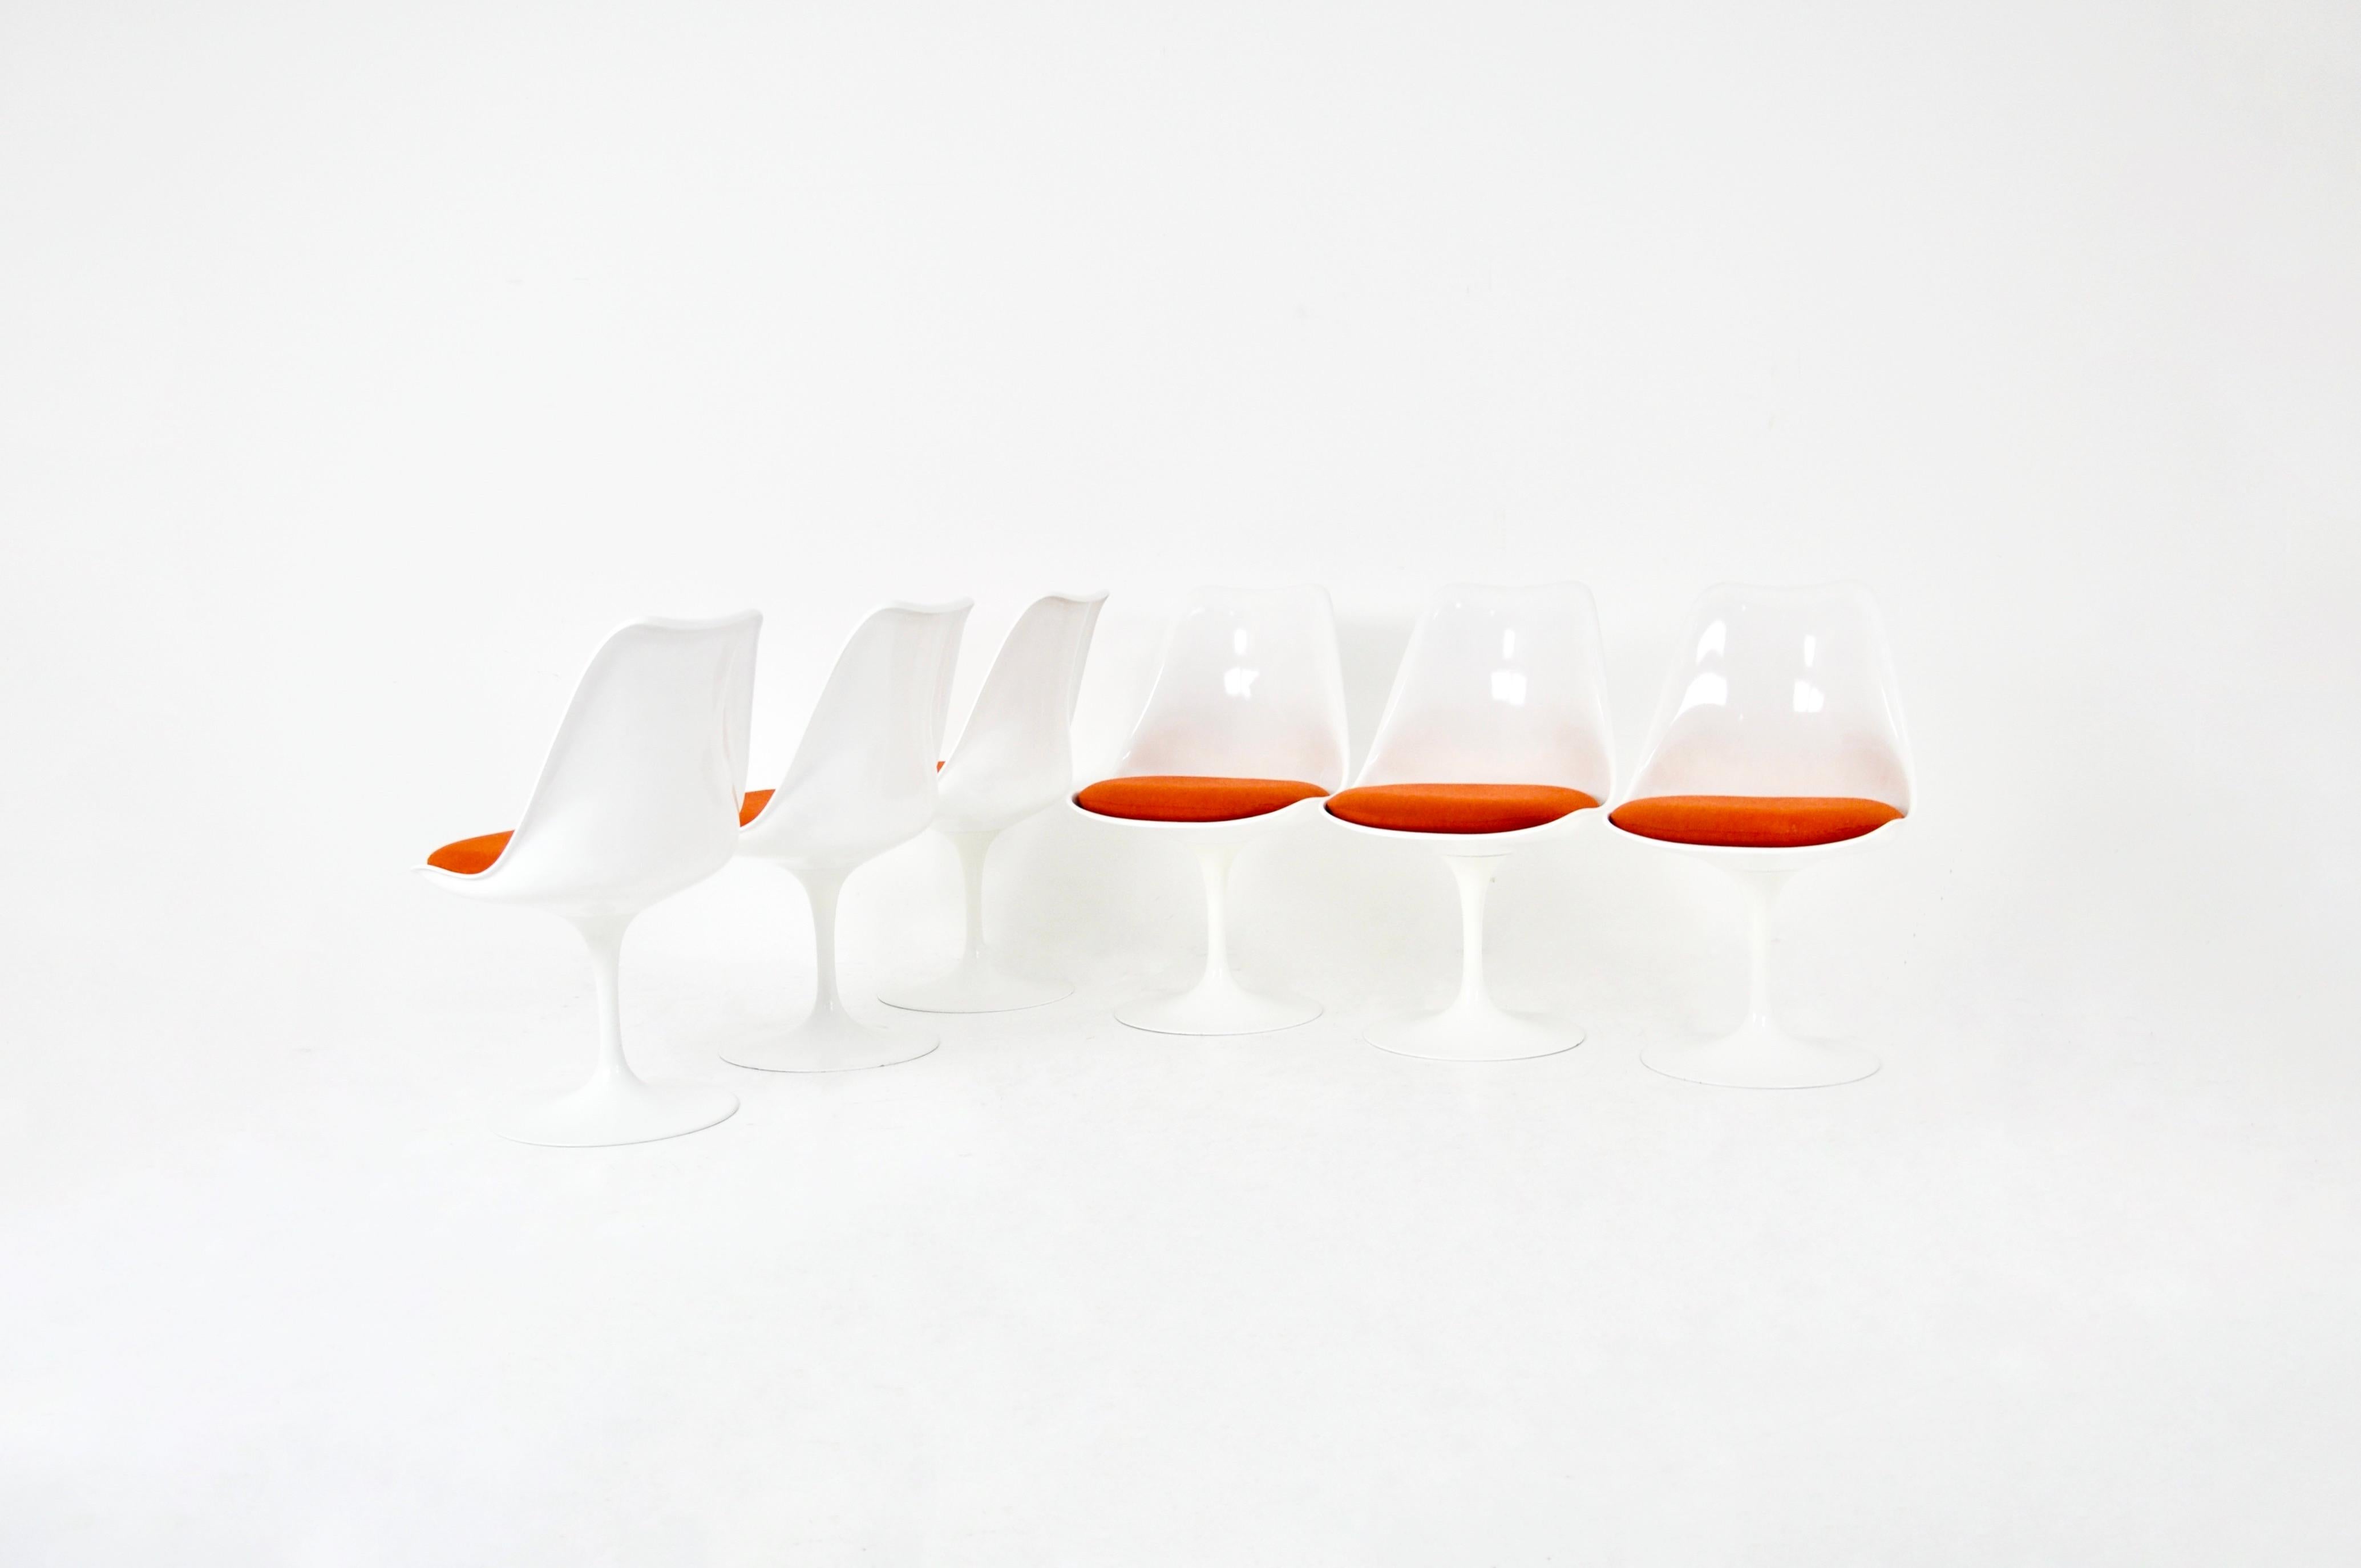 Set of 6 chairs in fibreglass, aluminium and orange fabric. Stamped Knoll international under the legs. Seat height 45cm. Wear due to time and age of the chairs.